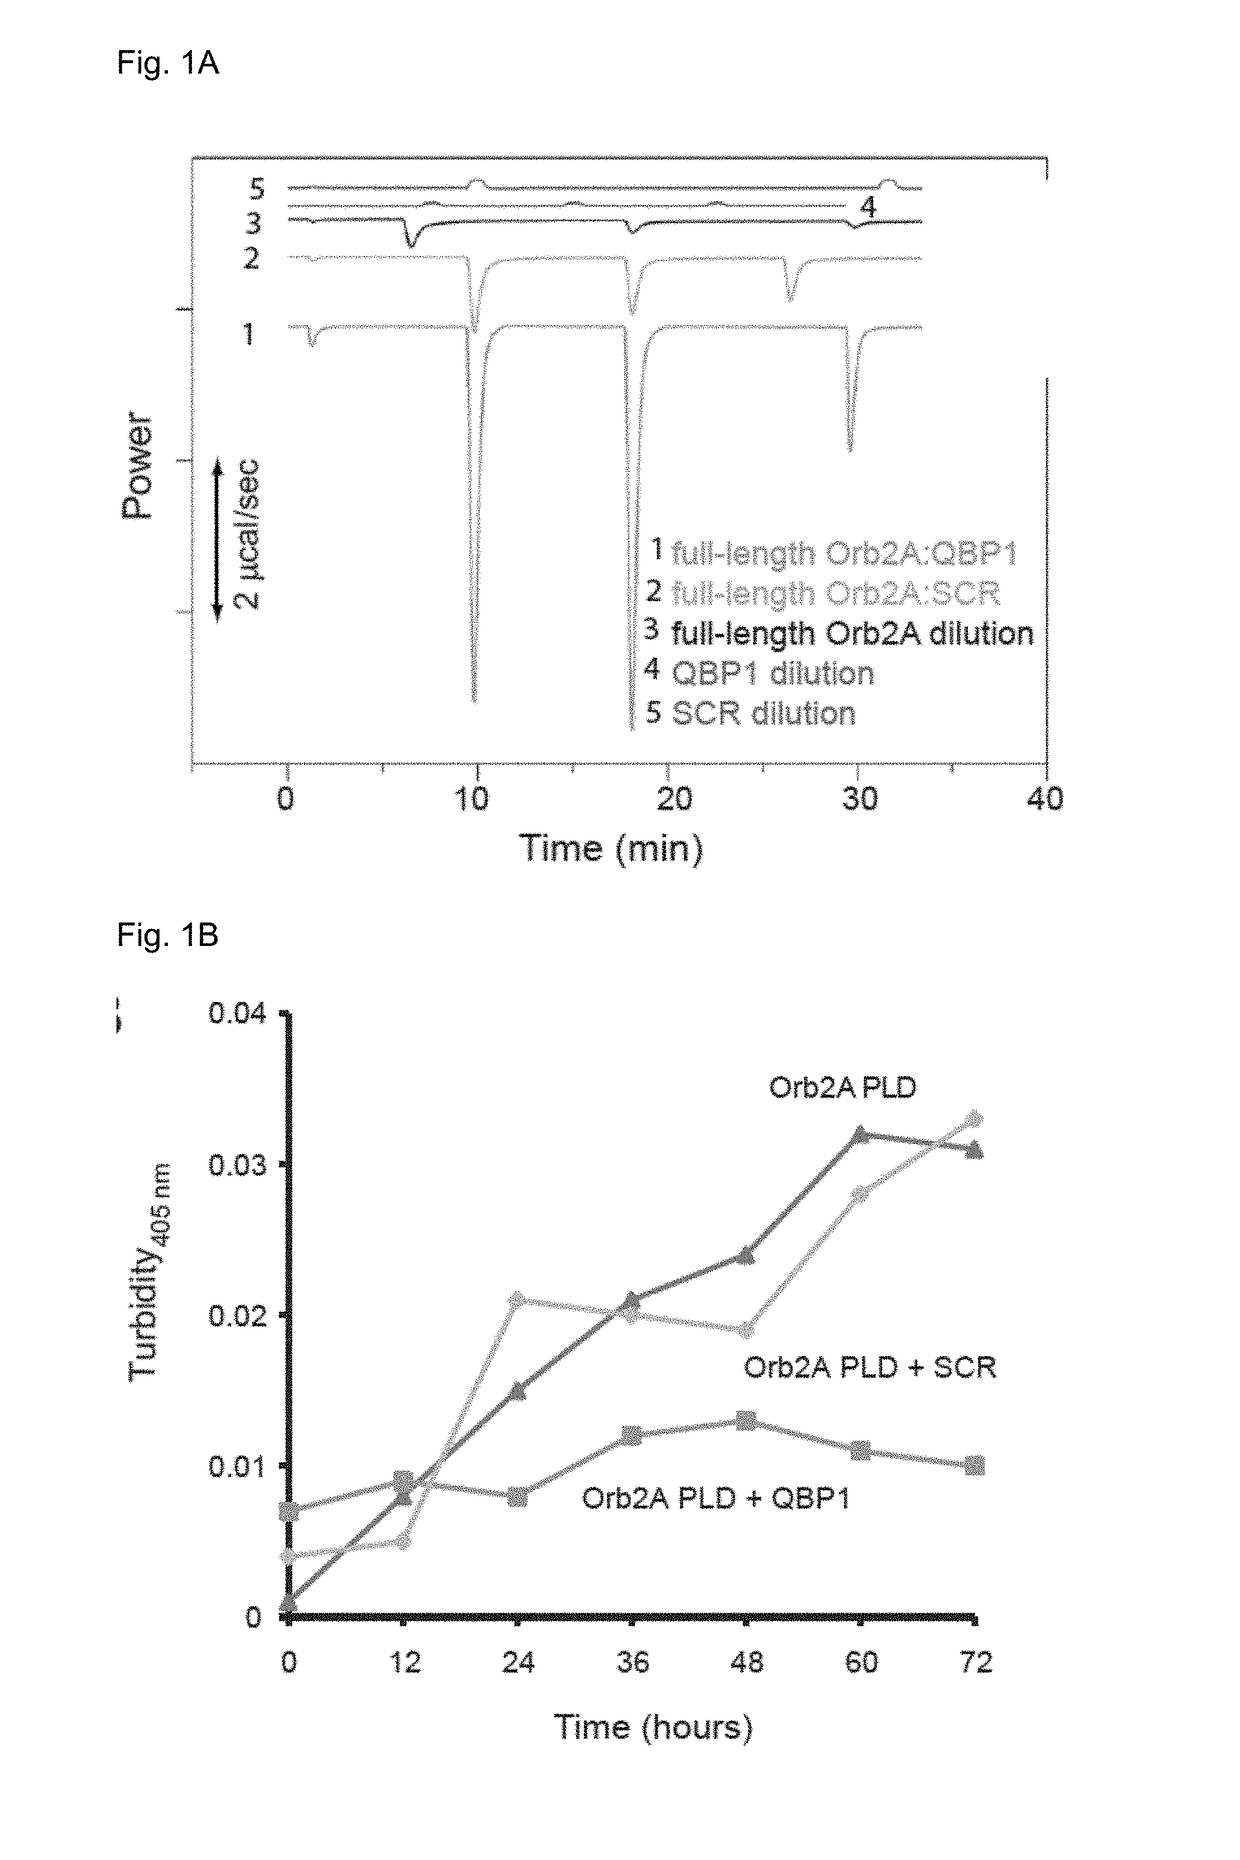 Use of qbp1 peptide for the inhibition of memory consolidation